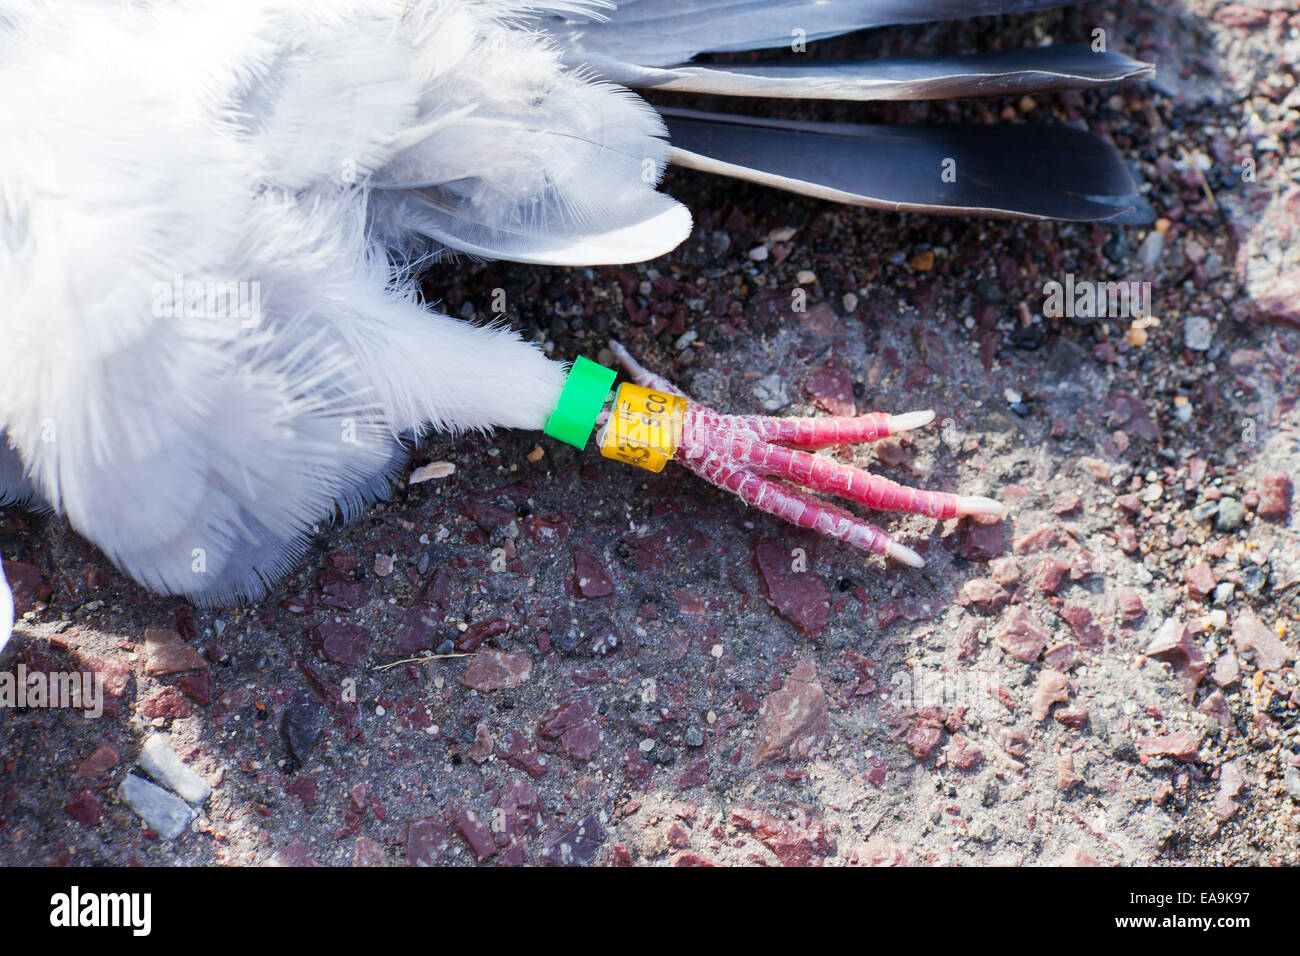 Dead pigeon on road with leg marking rings - USA Stock Photo